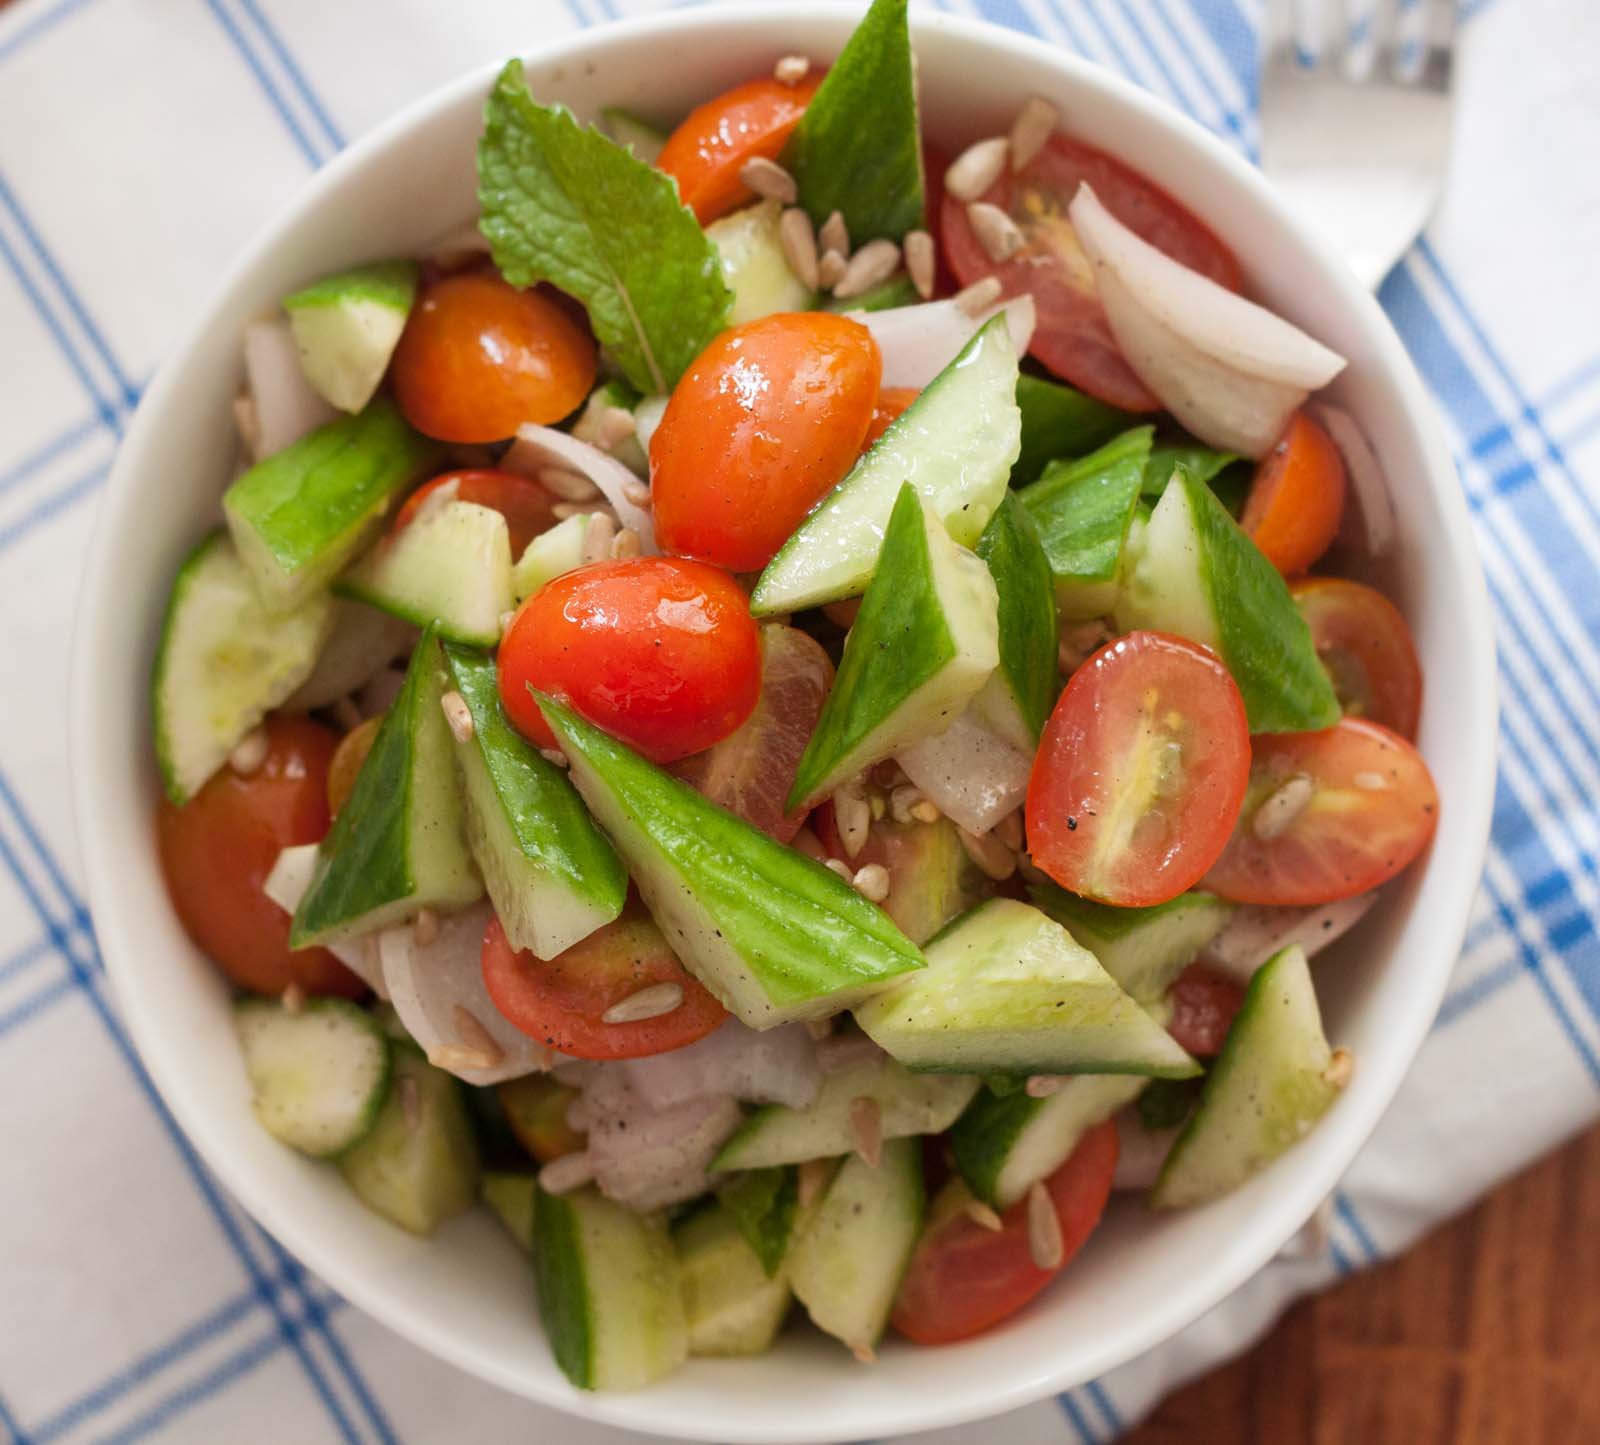 Cherry tomatoes, cucumber and onion salad